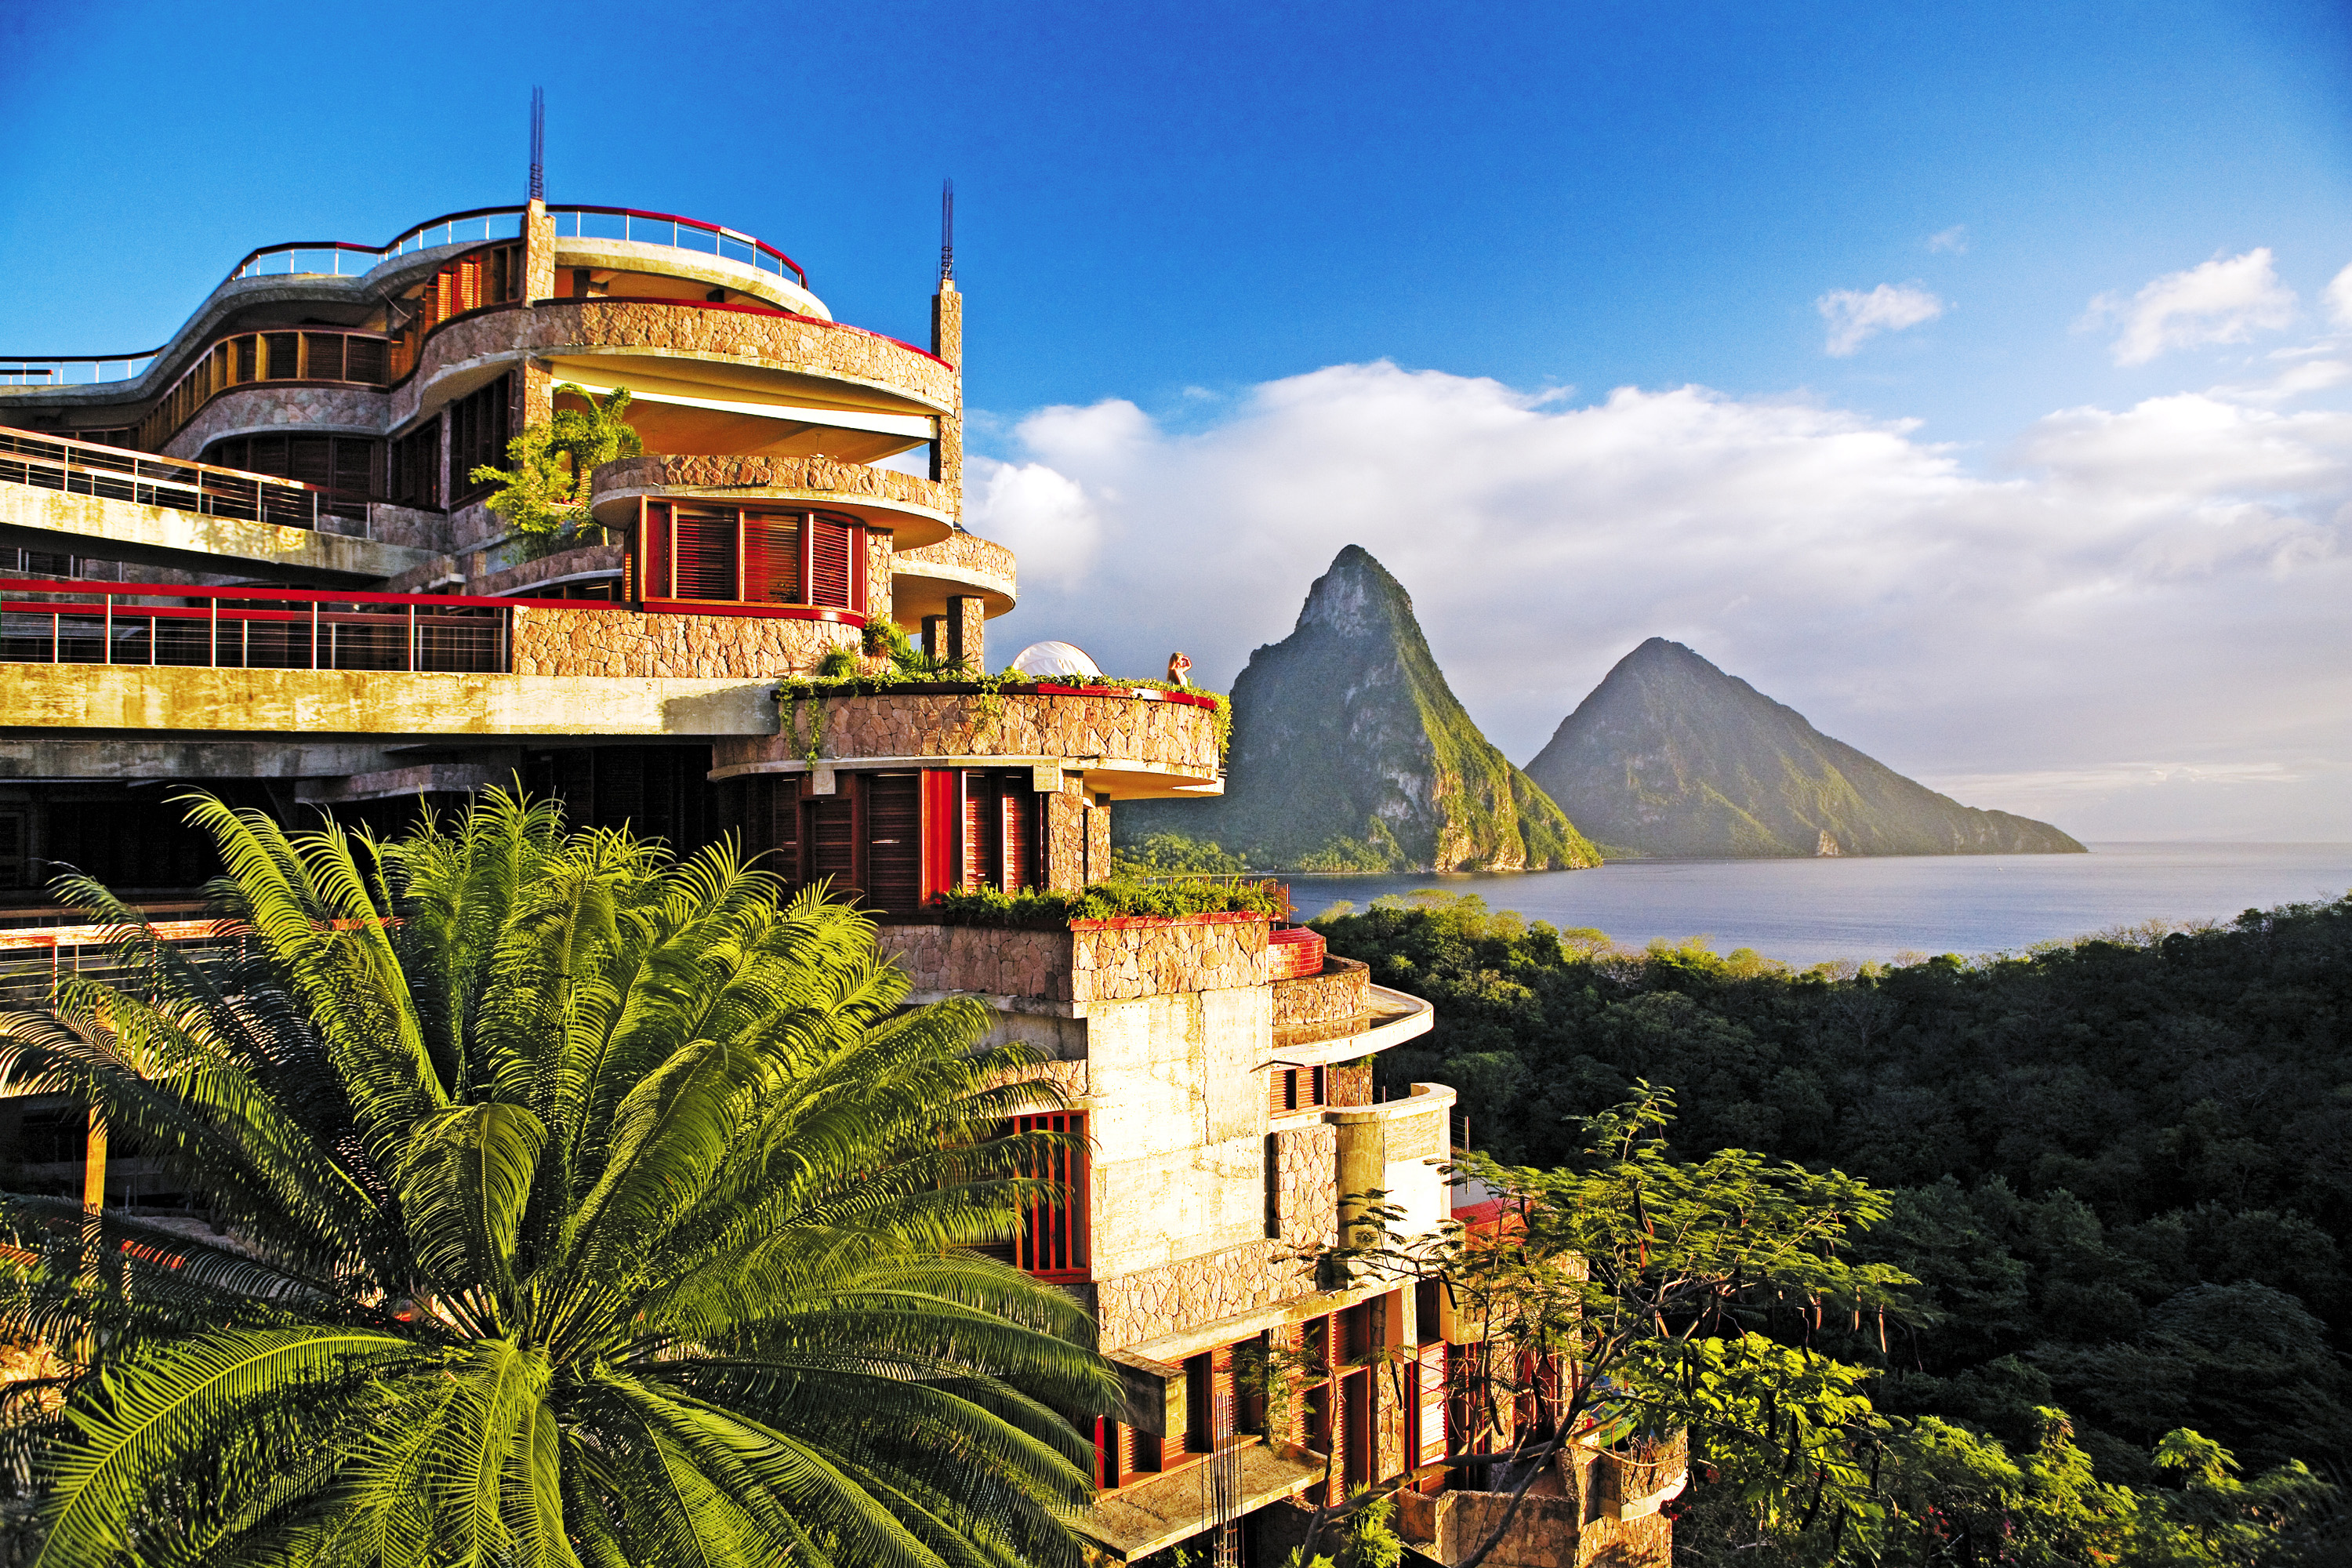 This image: The bold architectural design of Jade Mountain, St Lucia.